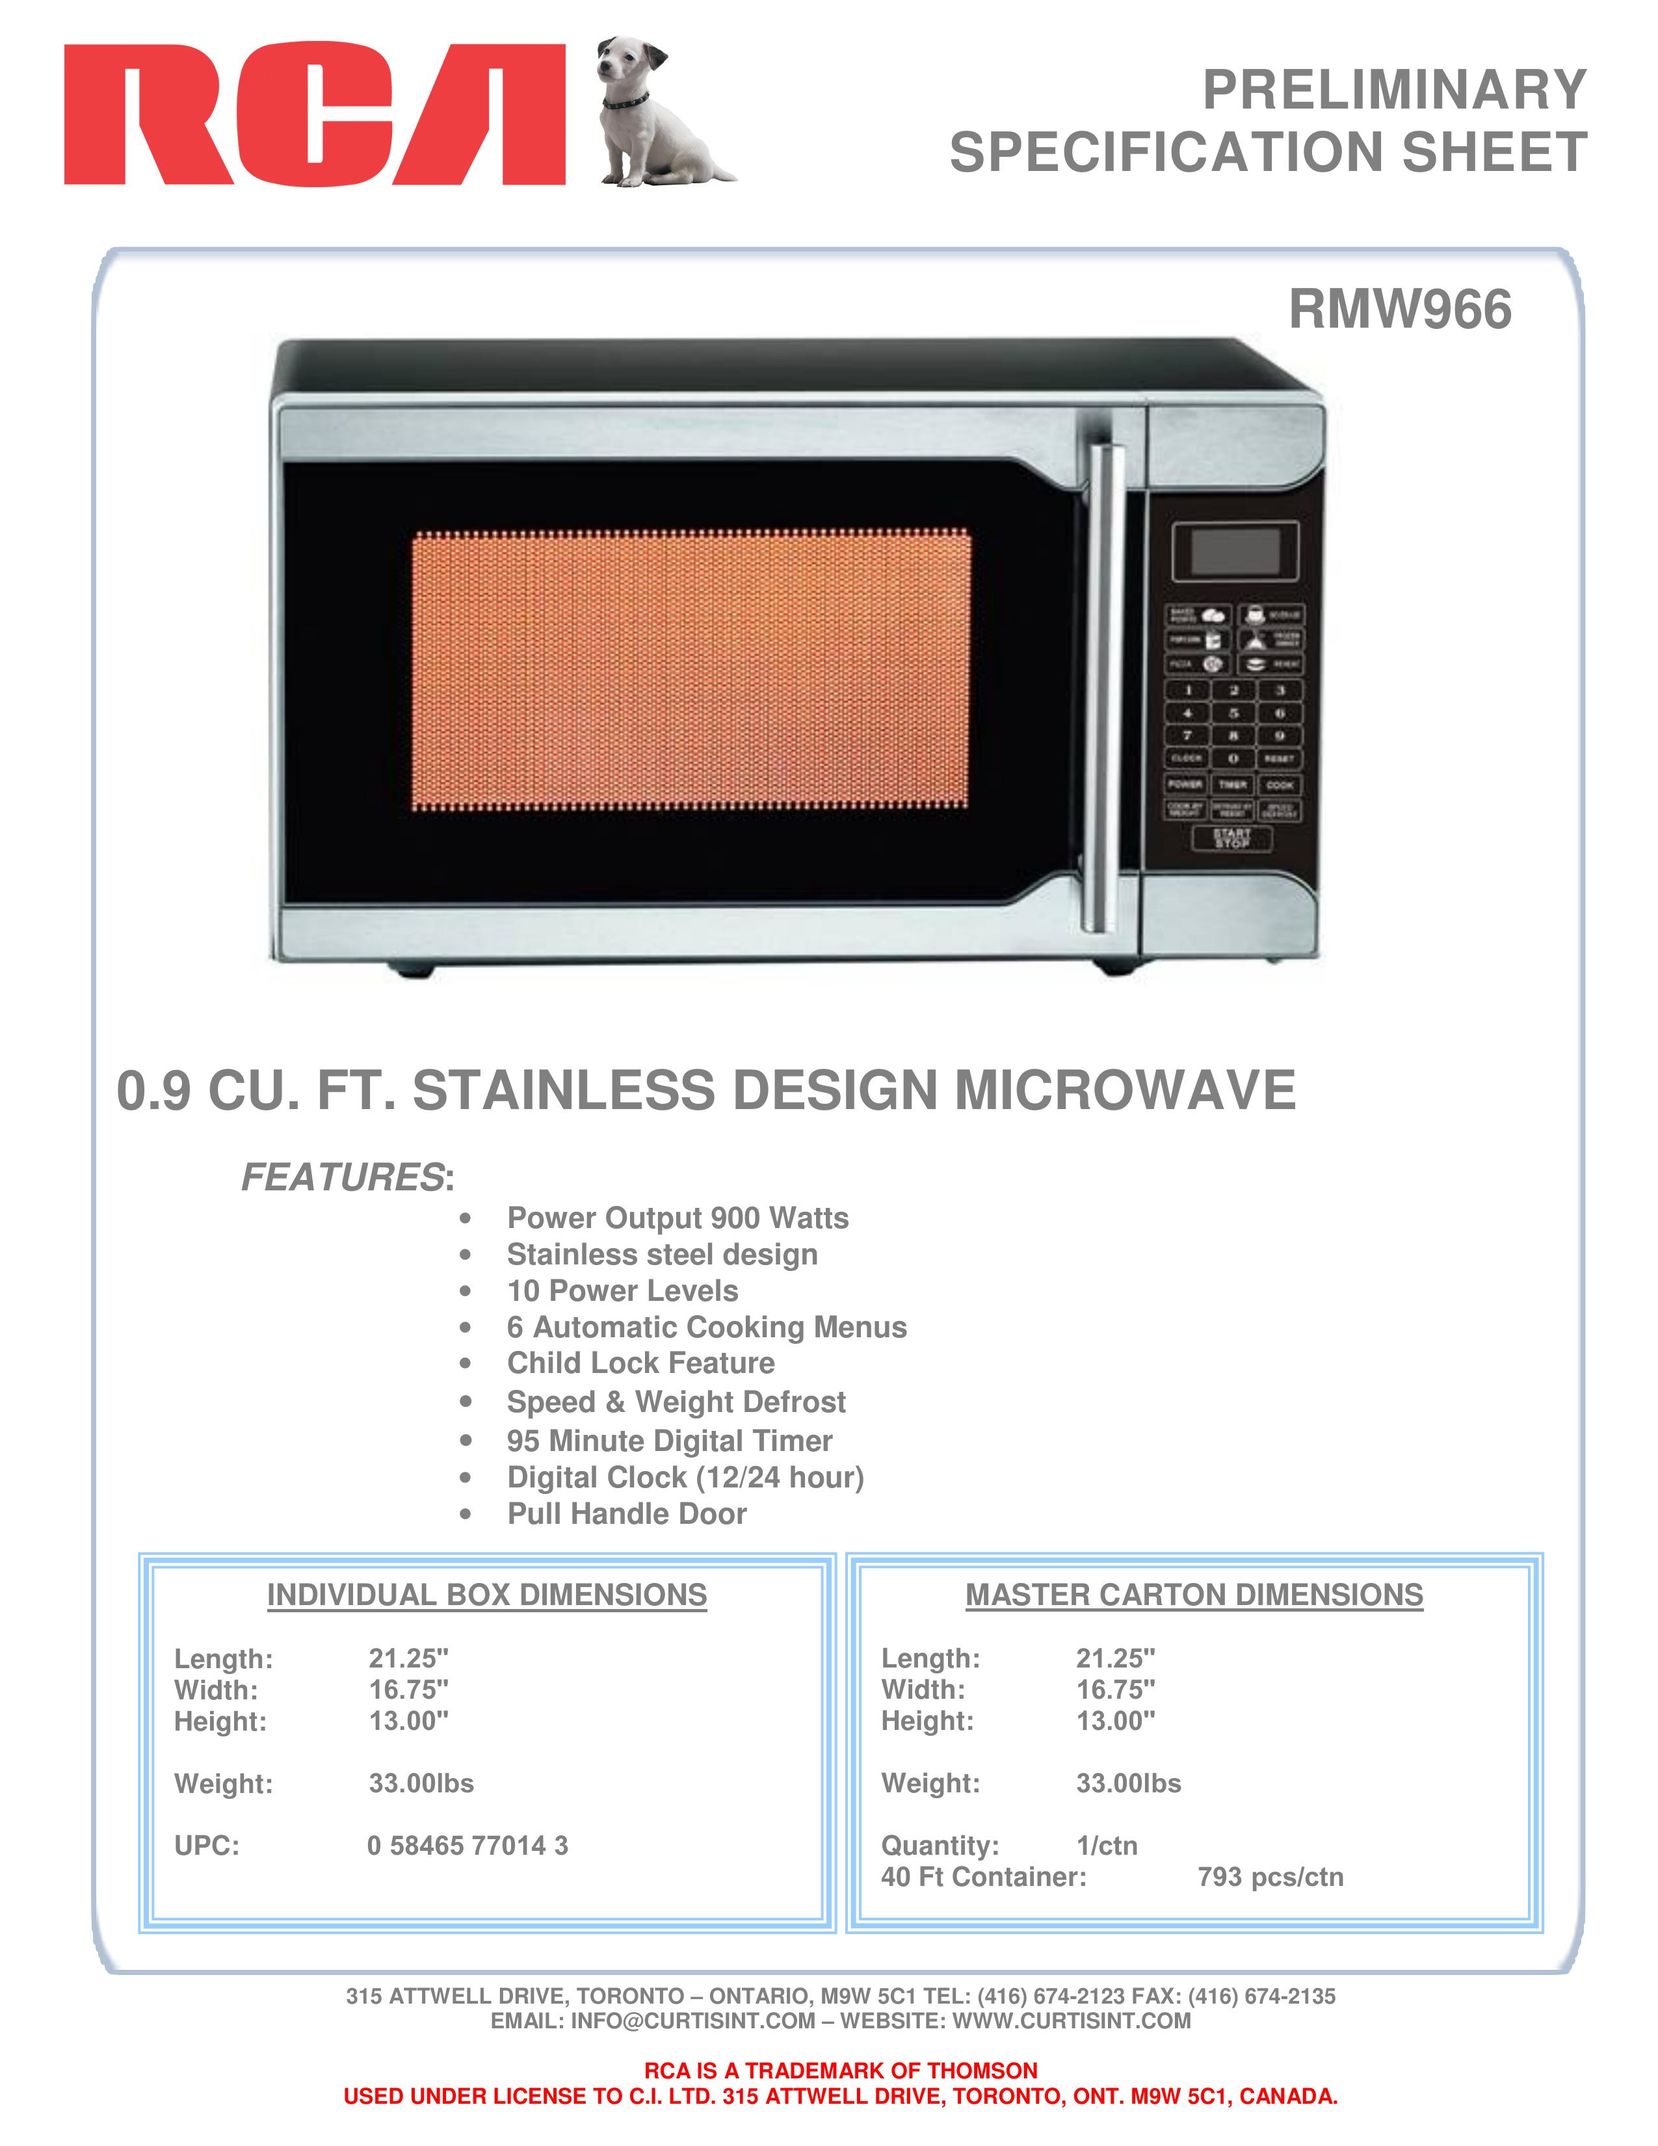 Curtis RMW966 Microwave Oven User Manual